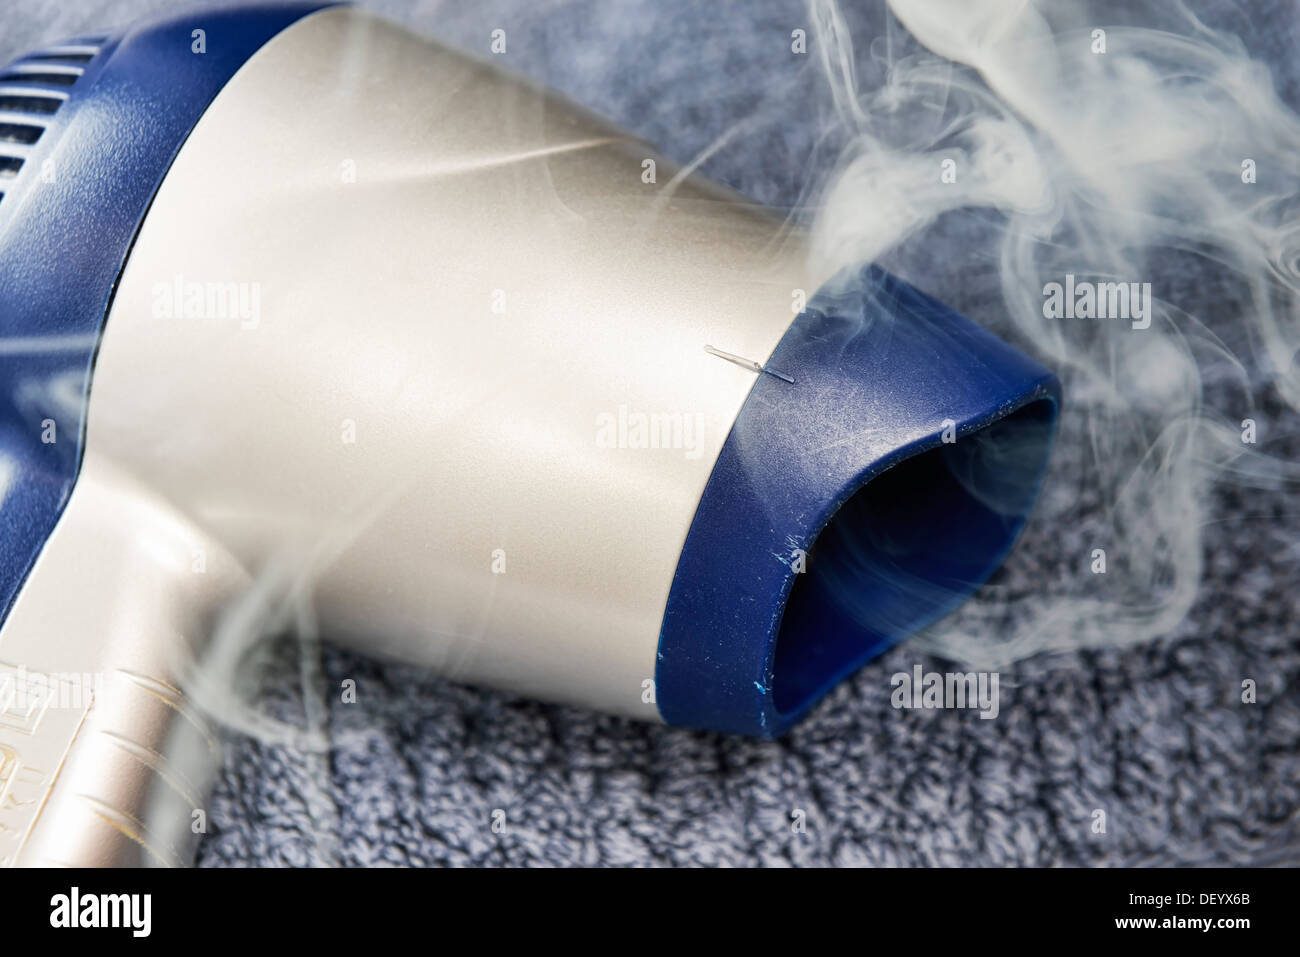 https://c8.alamy.com/comp/DEYX6B/smoke-coming-from-a-hairdryer-built-wearing-parts-for-electrical-appliances-DEYX6B.jpg